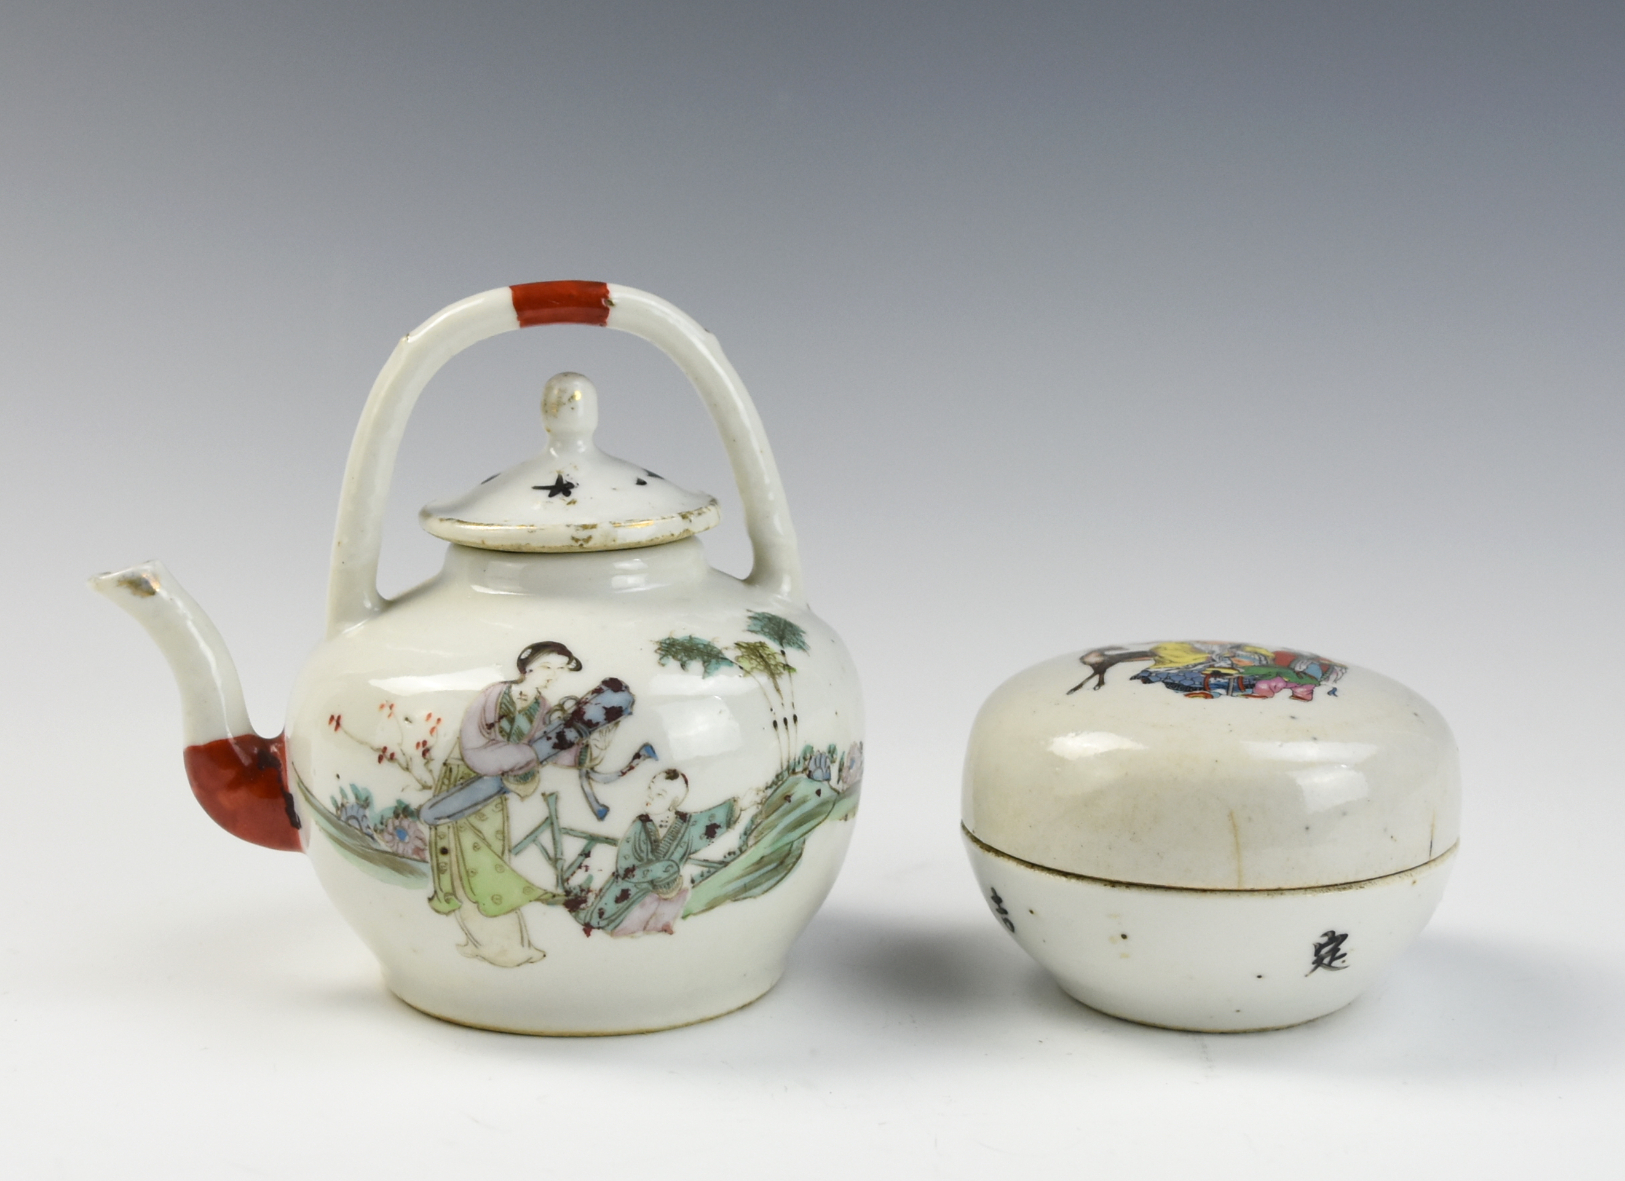 TWO CHINESE FAMILLE ROSE TEAPOT 2ced24